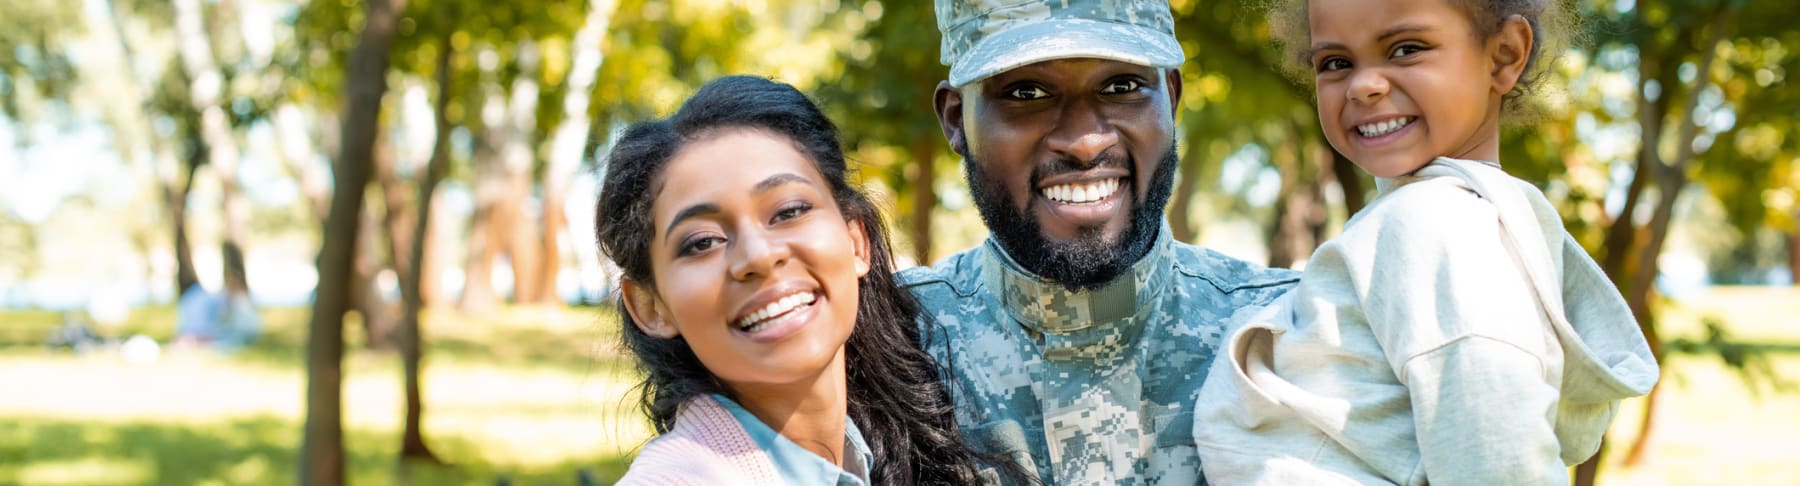 Military family smiles in nature setting.